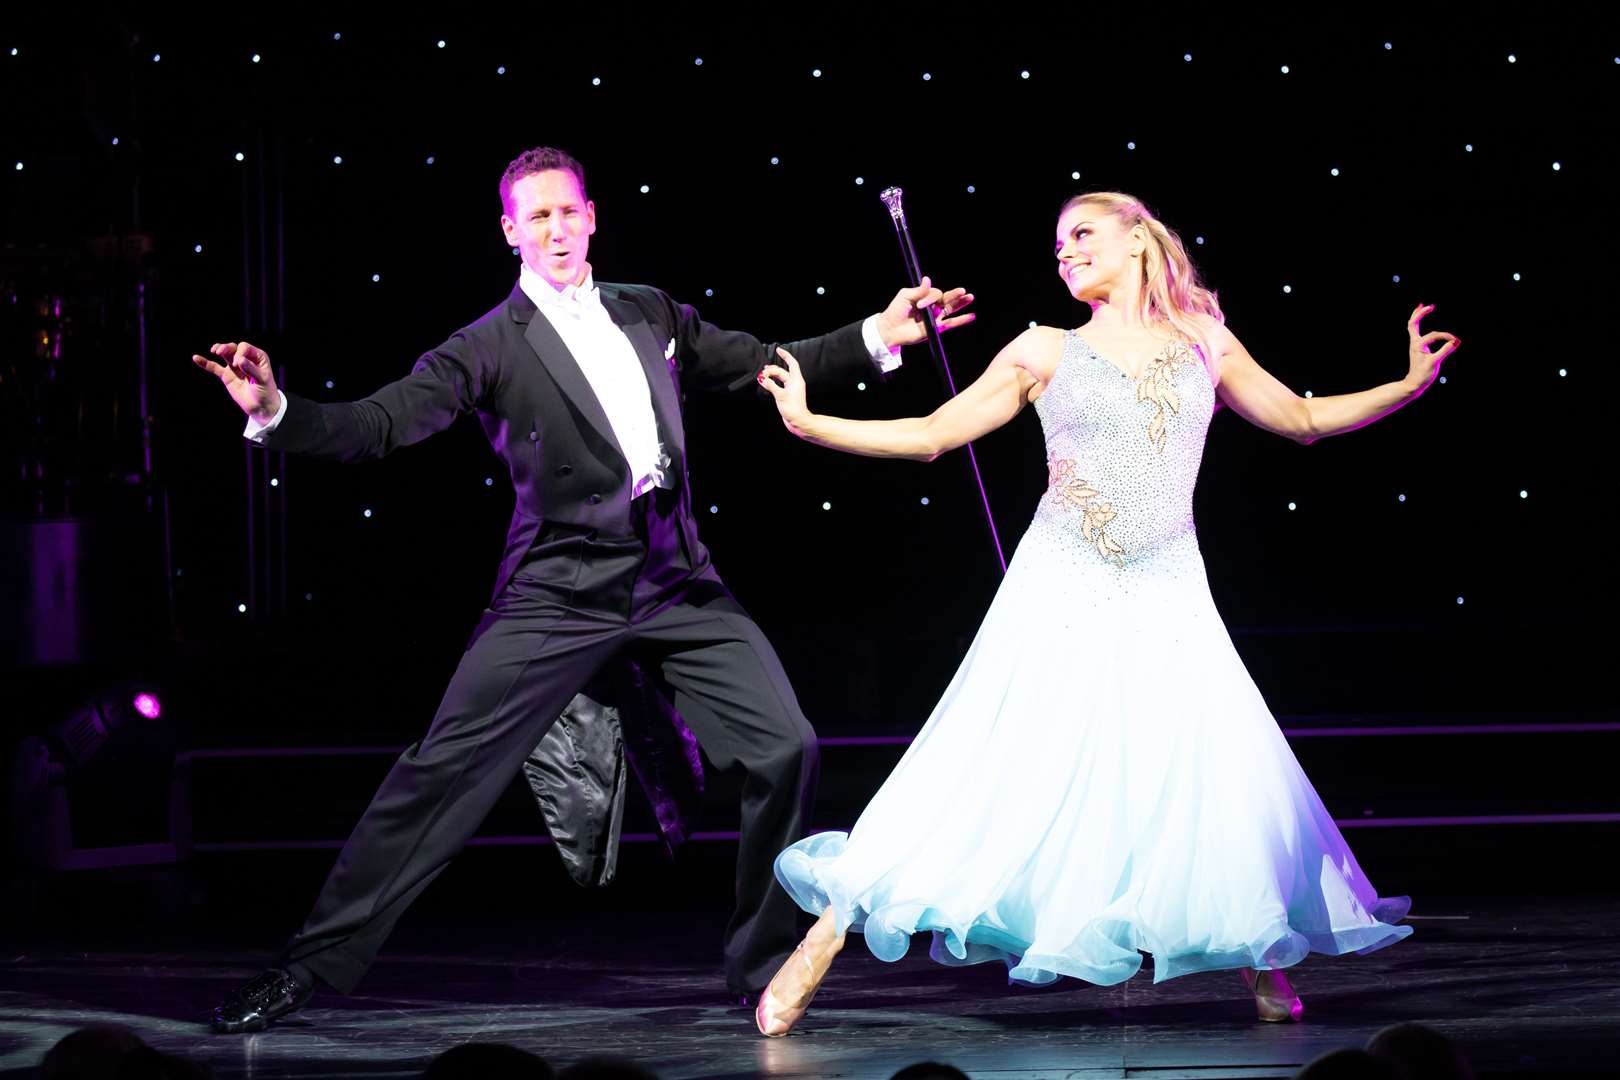 The elegance of ballroom is important to the former Strictly star.